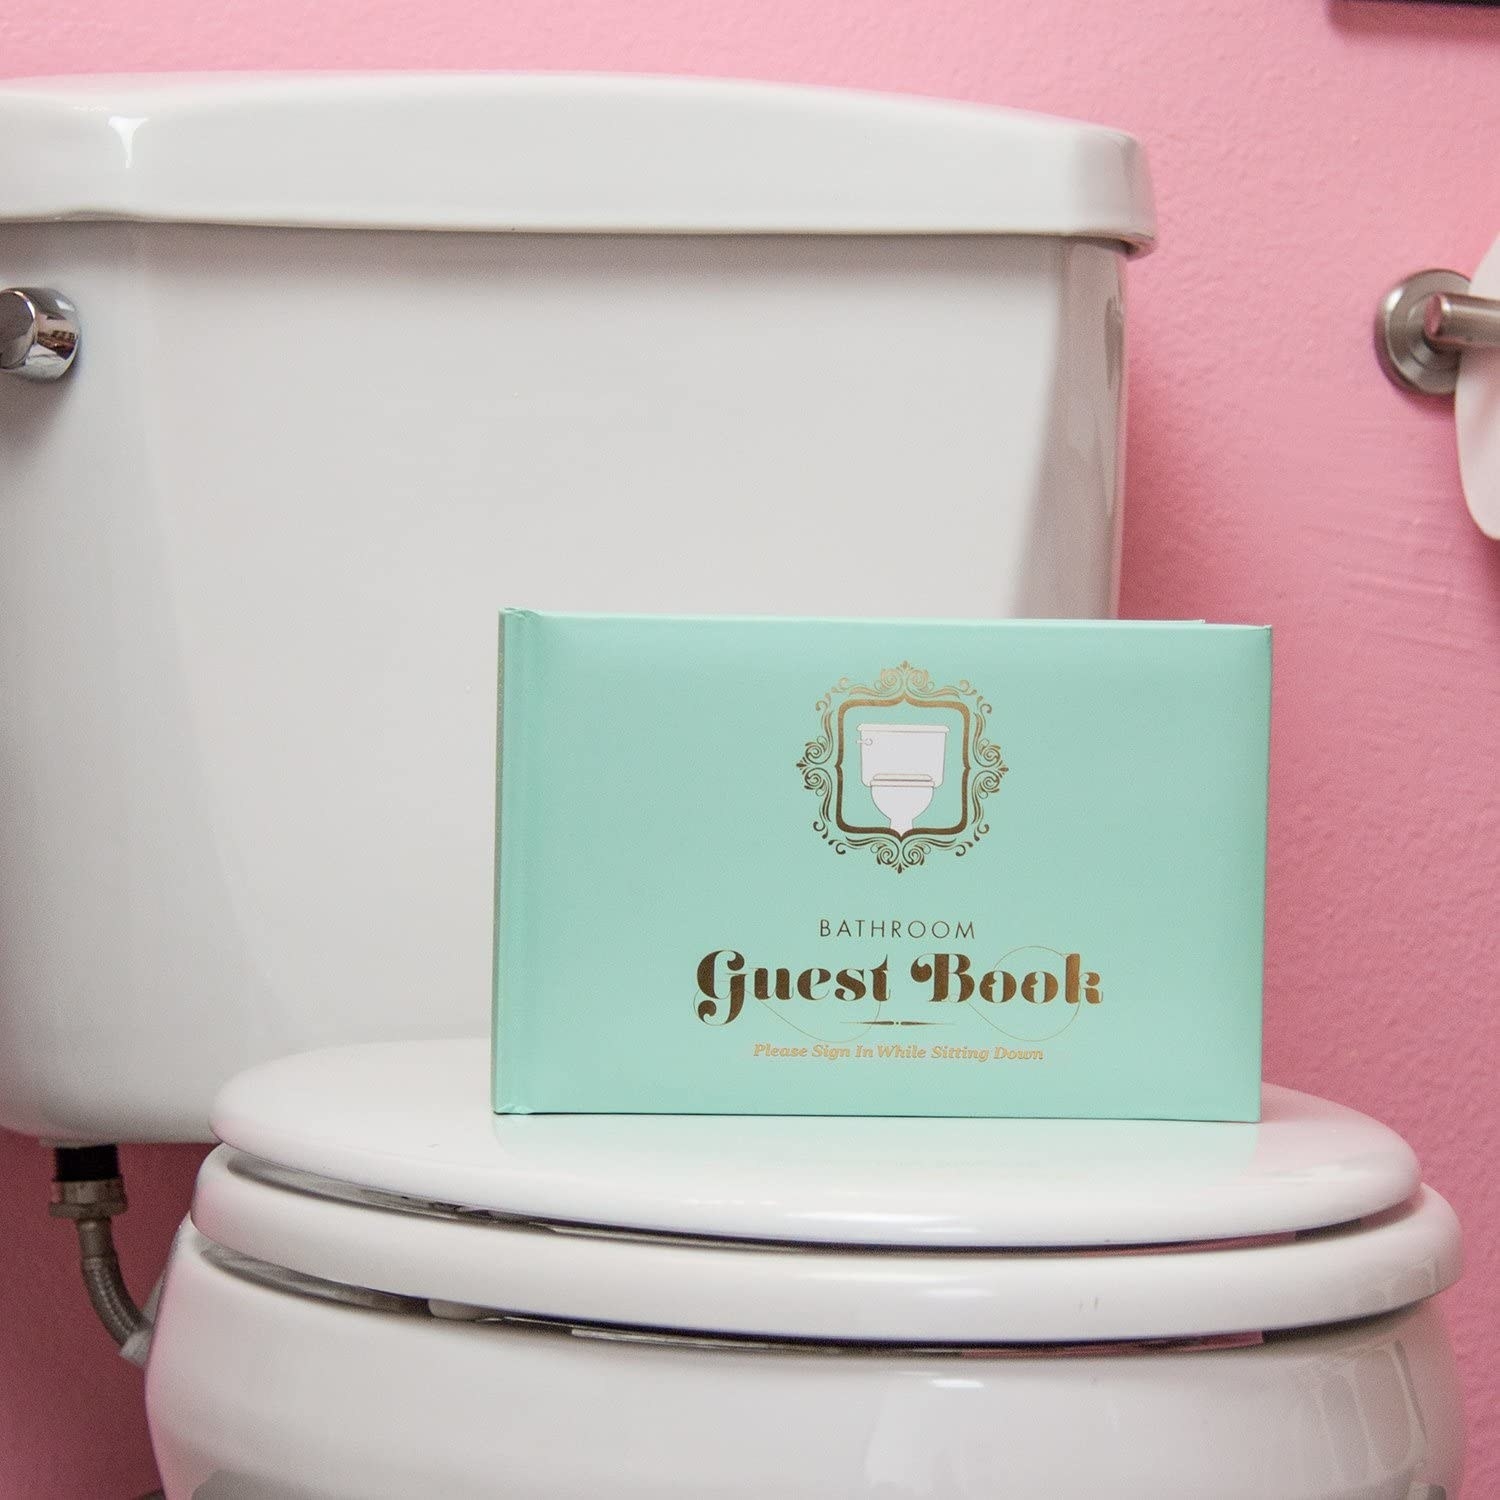 The guest book on a toilet seat